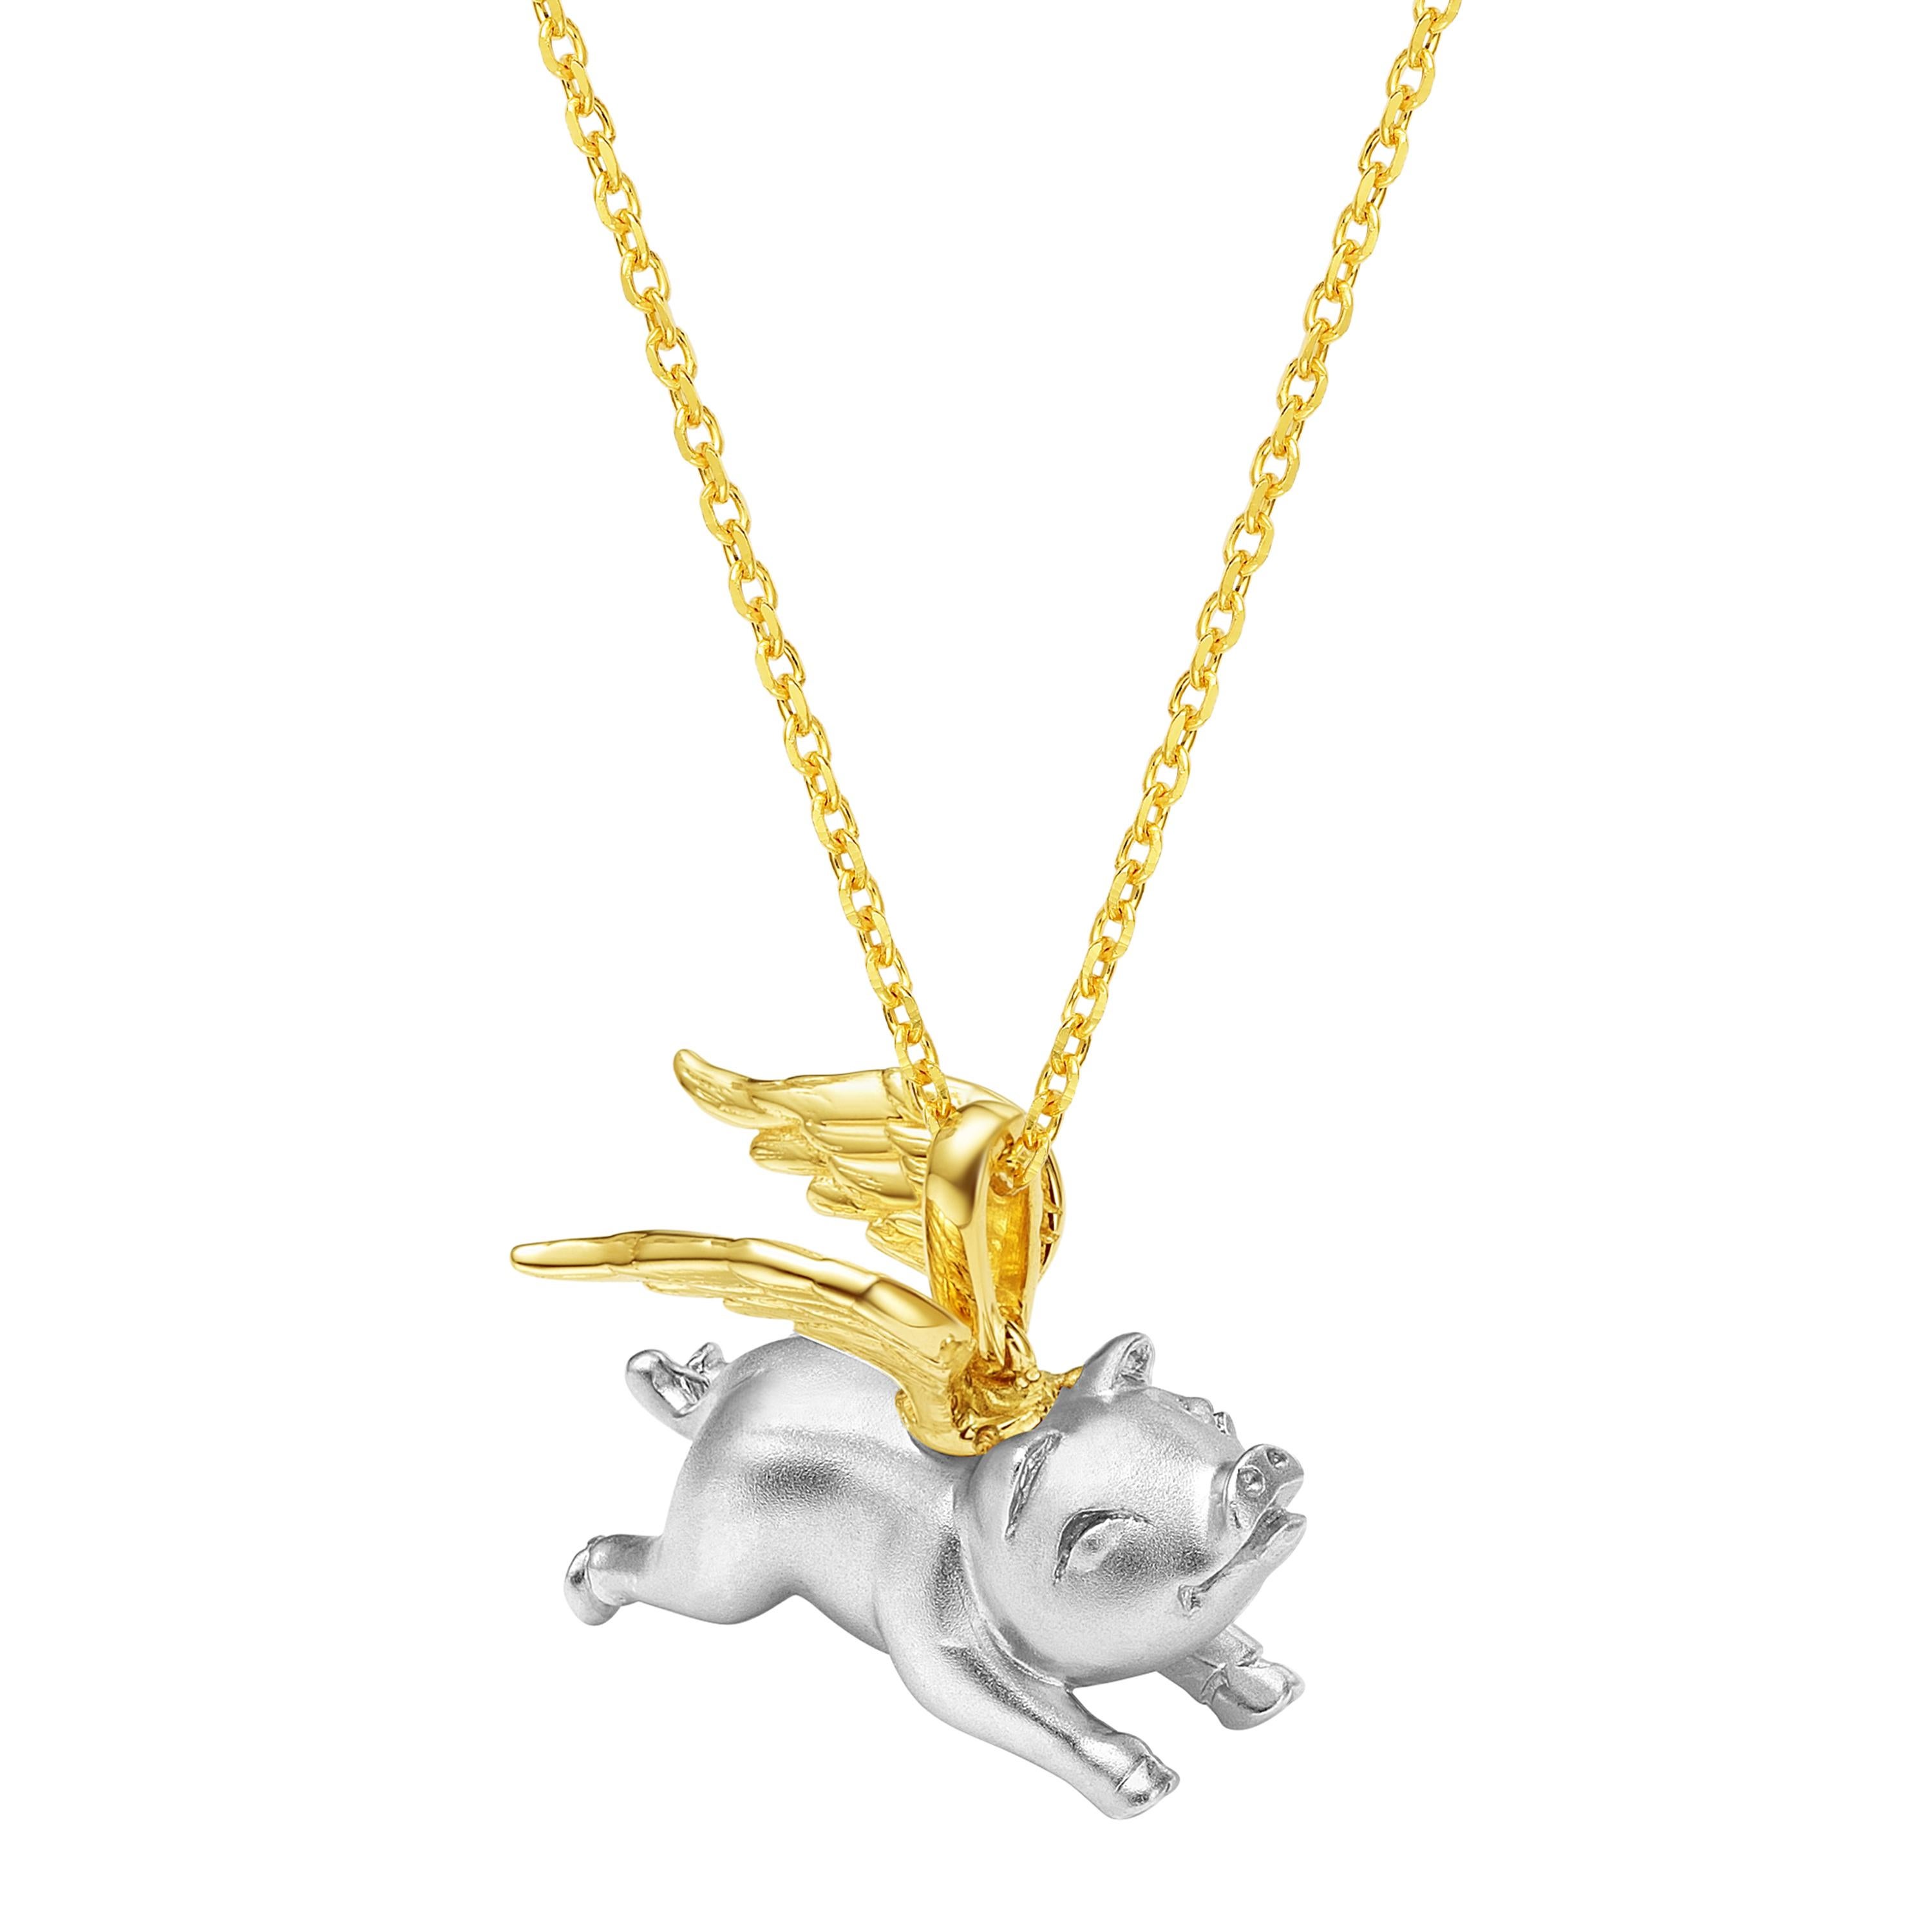 Pig pendant and bracelet with a hand-carved solid silver pig and yellow gold plated fluttering wings. It comes packaged with a 16 inches + 2-inch extension 14k yellow gold plated sterling silver chain and a 7-inch red cord, for the versatility of